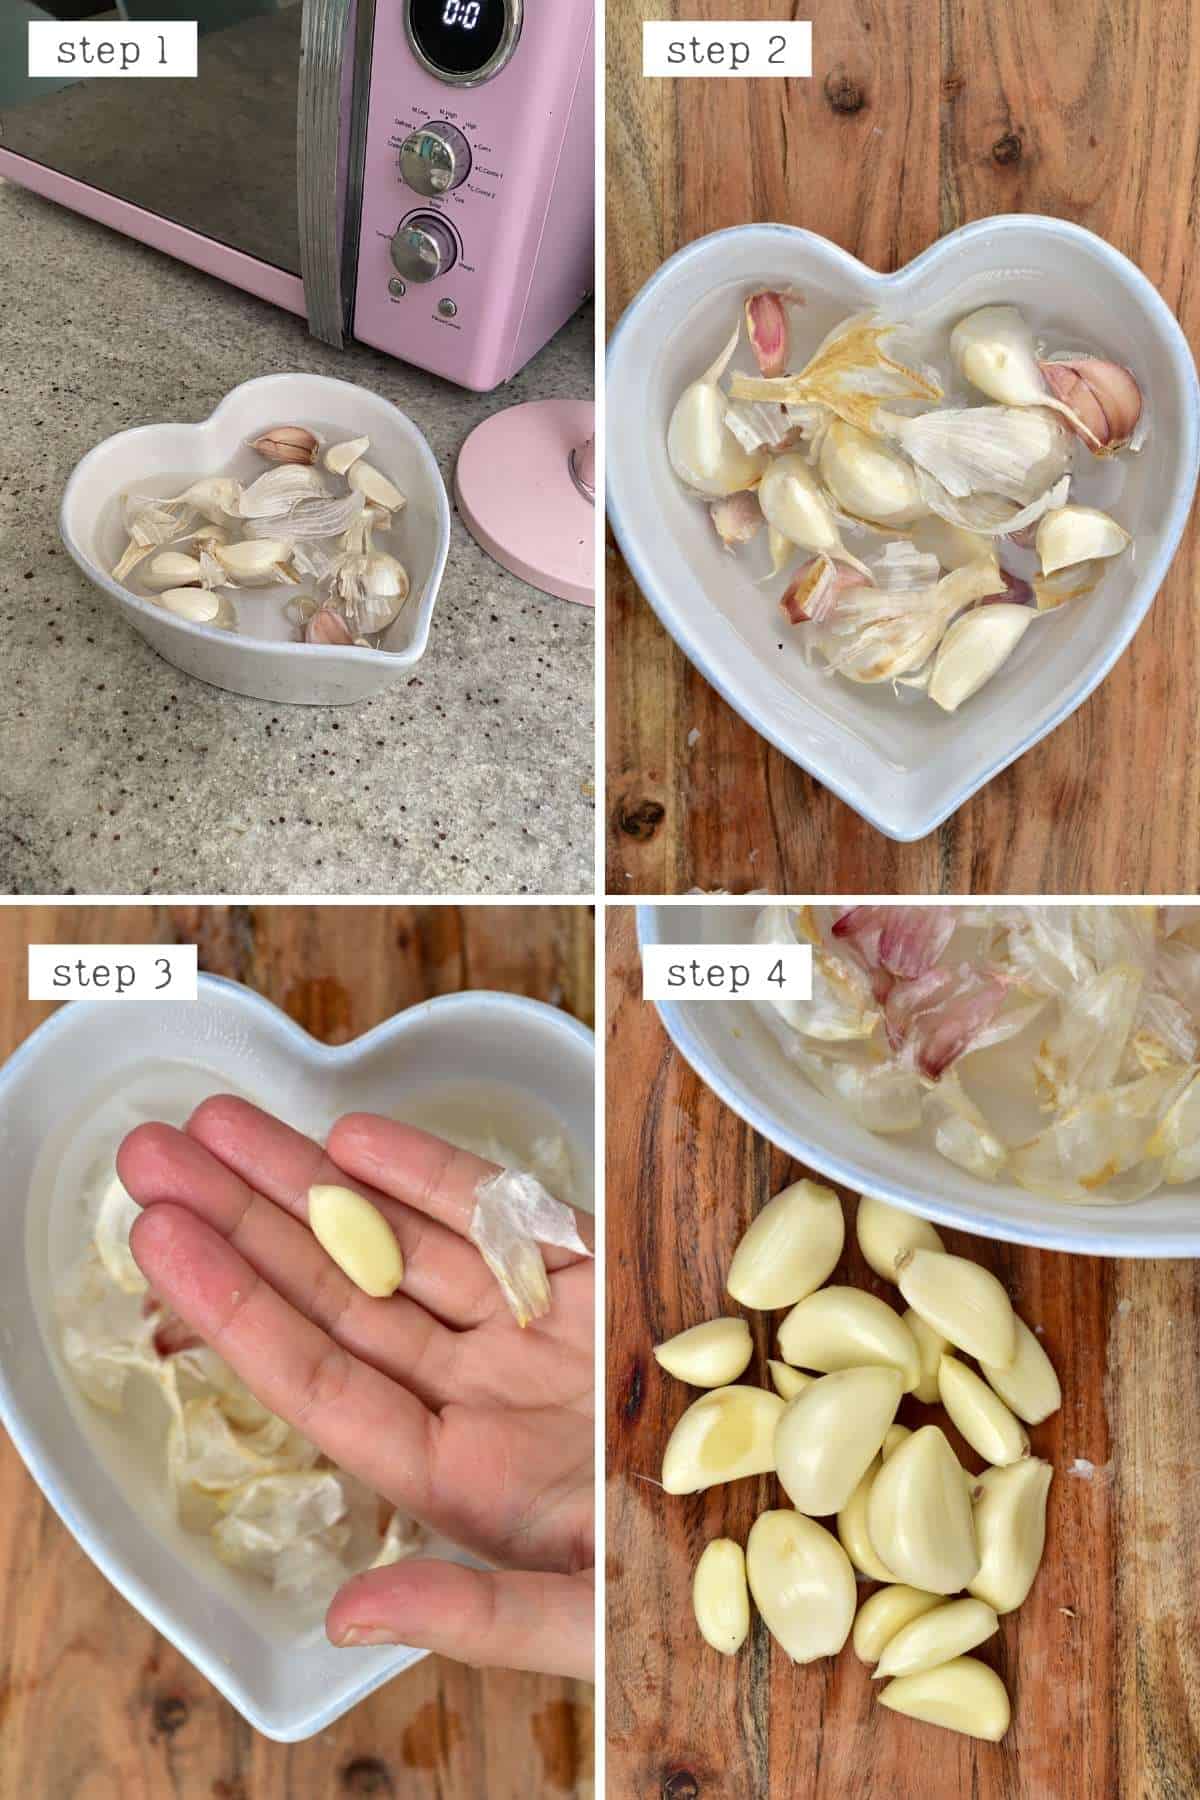 How to peel garlic - Method 5 with a microwave